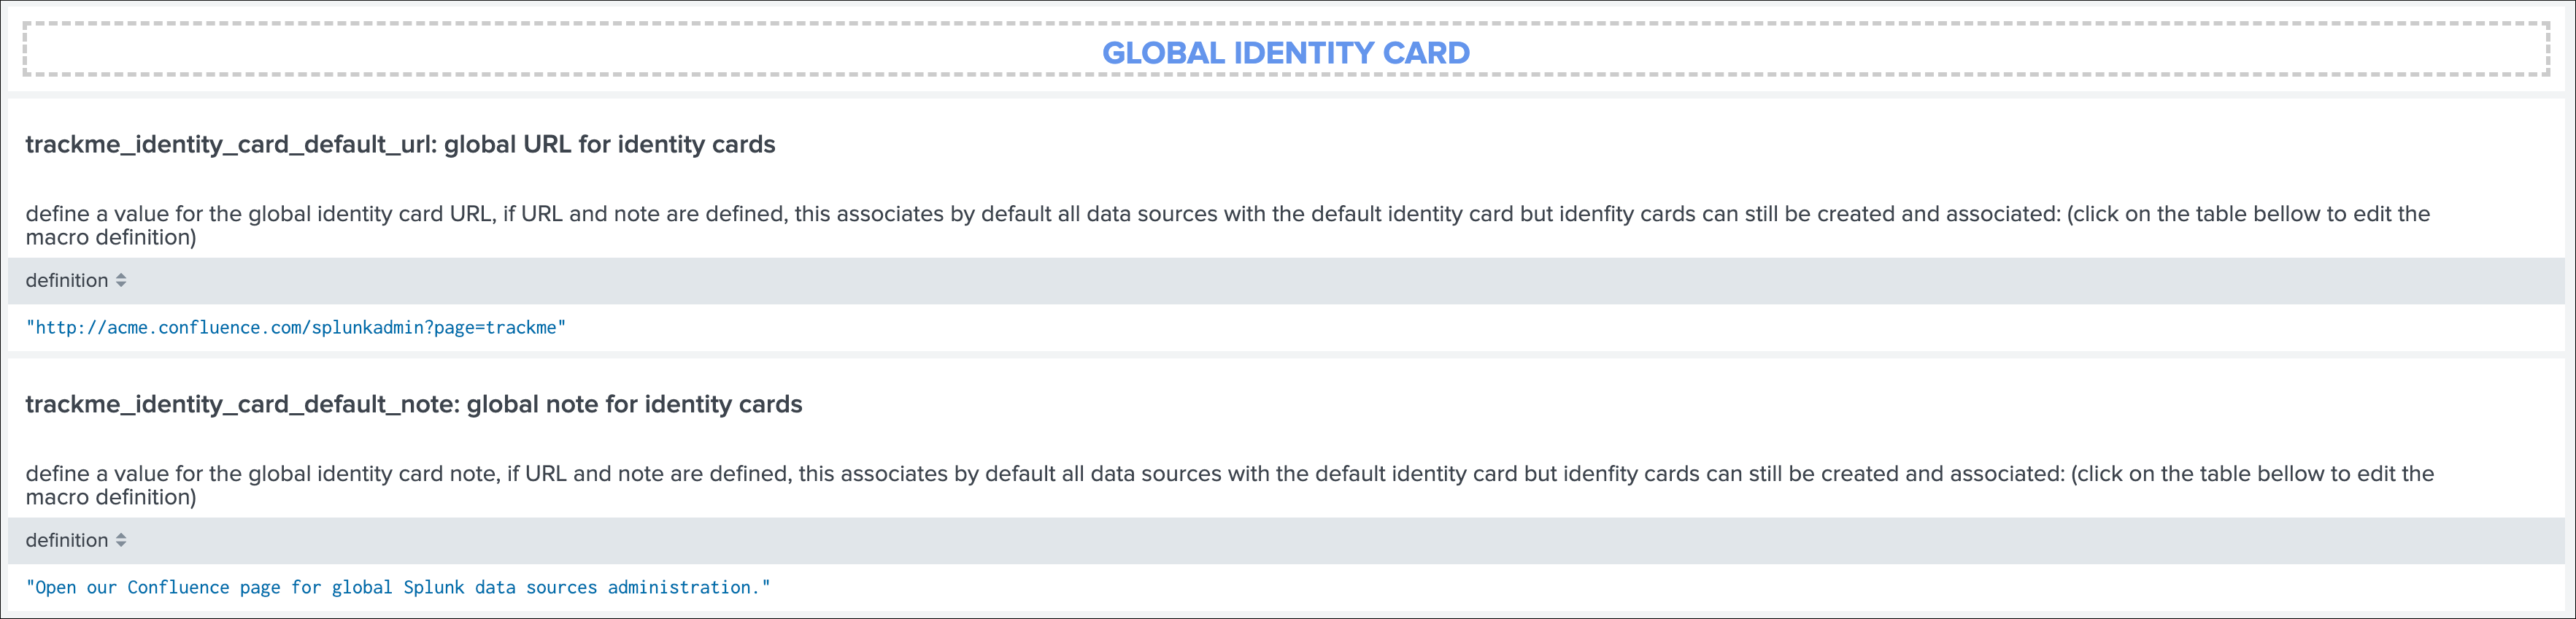 identity_card_global.png